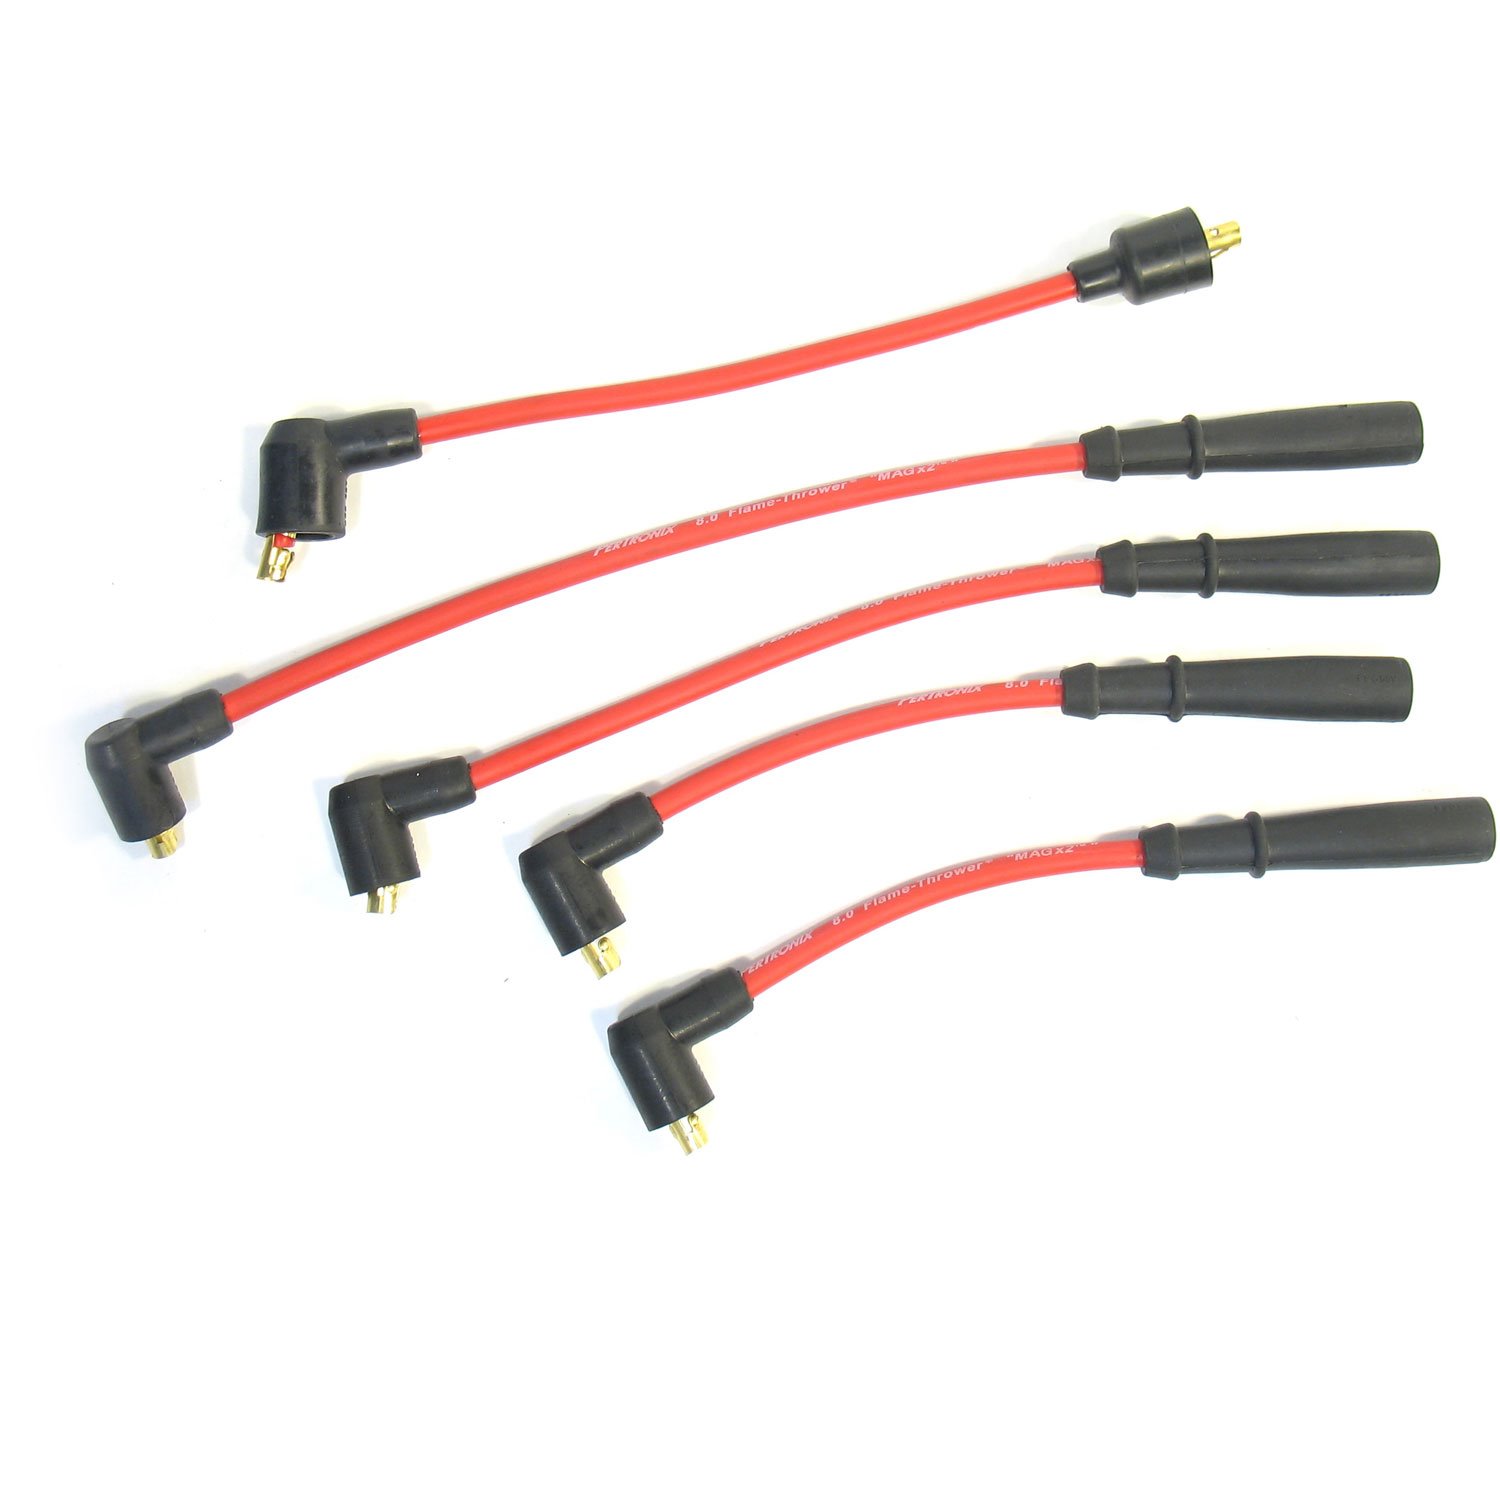 PerTronix 804413 Flame-Thrower Spark Plug Wires 4 cyl 8mm Triumph Red